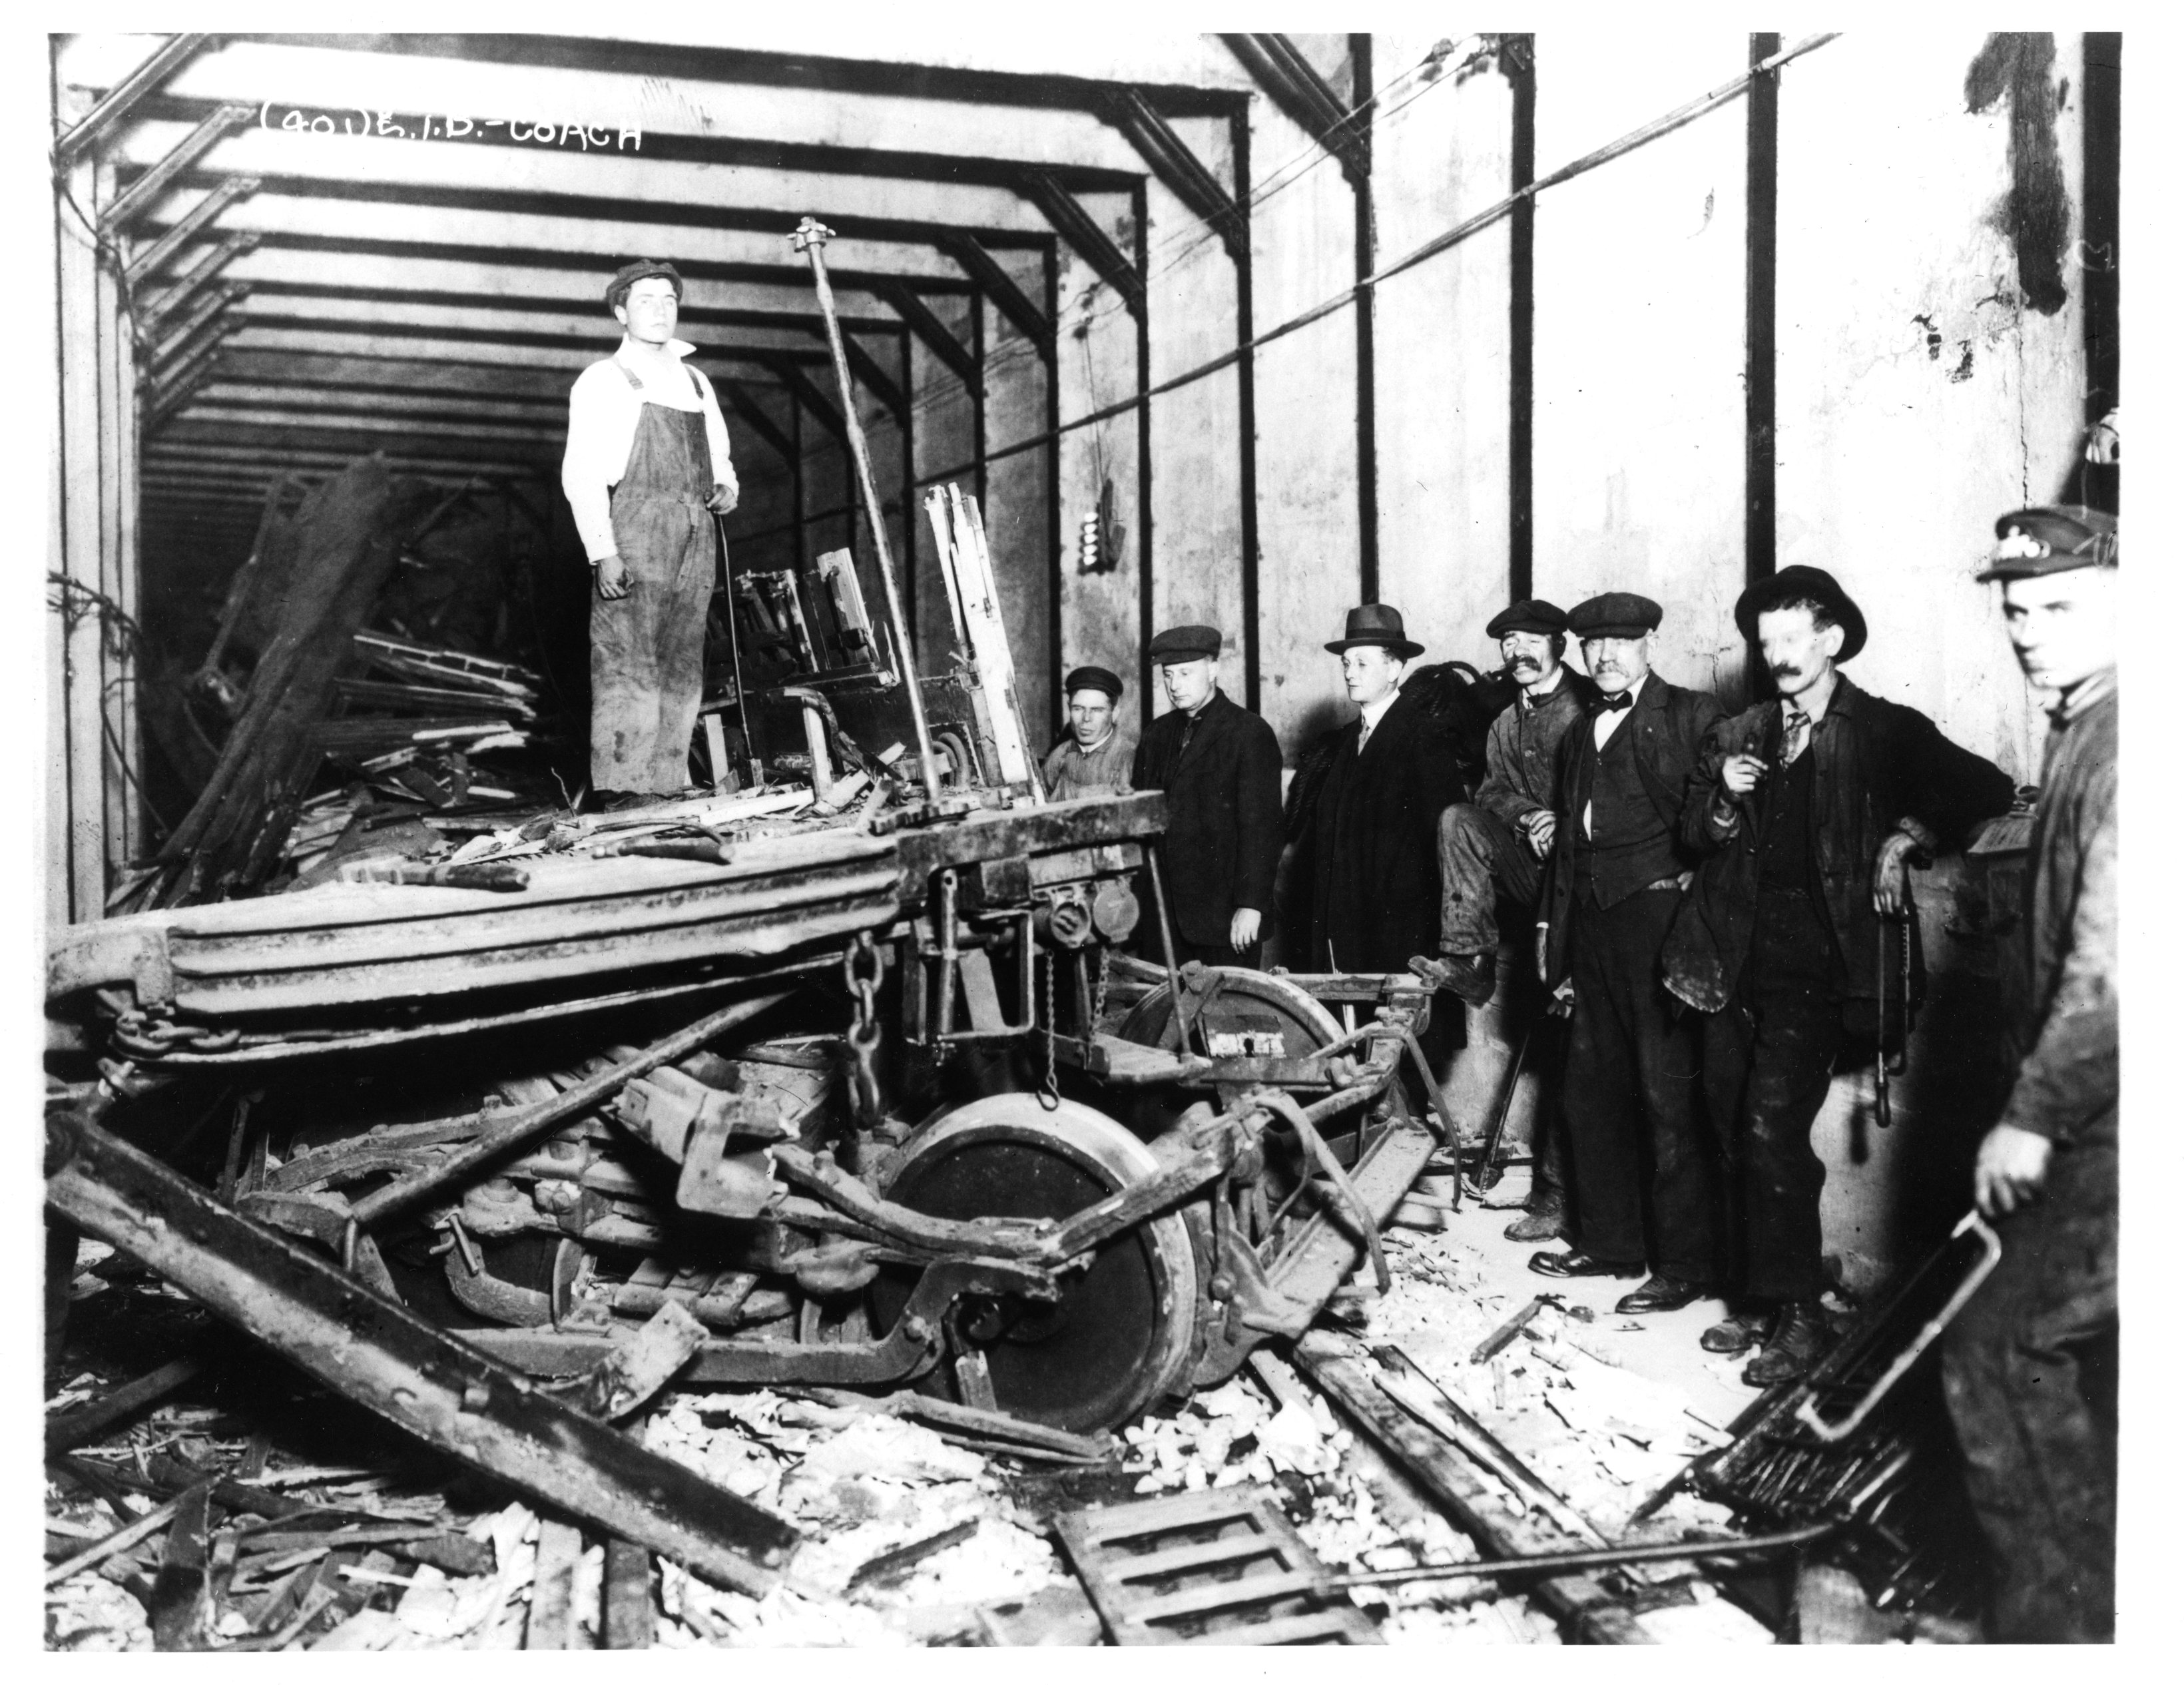 Workers and police stand among wreckage of the Malbone Street Wreck, 1918.